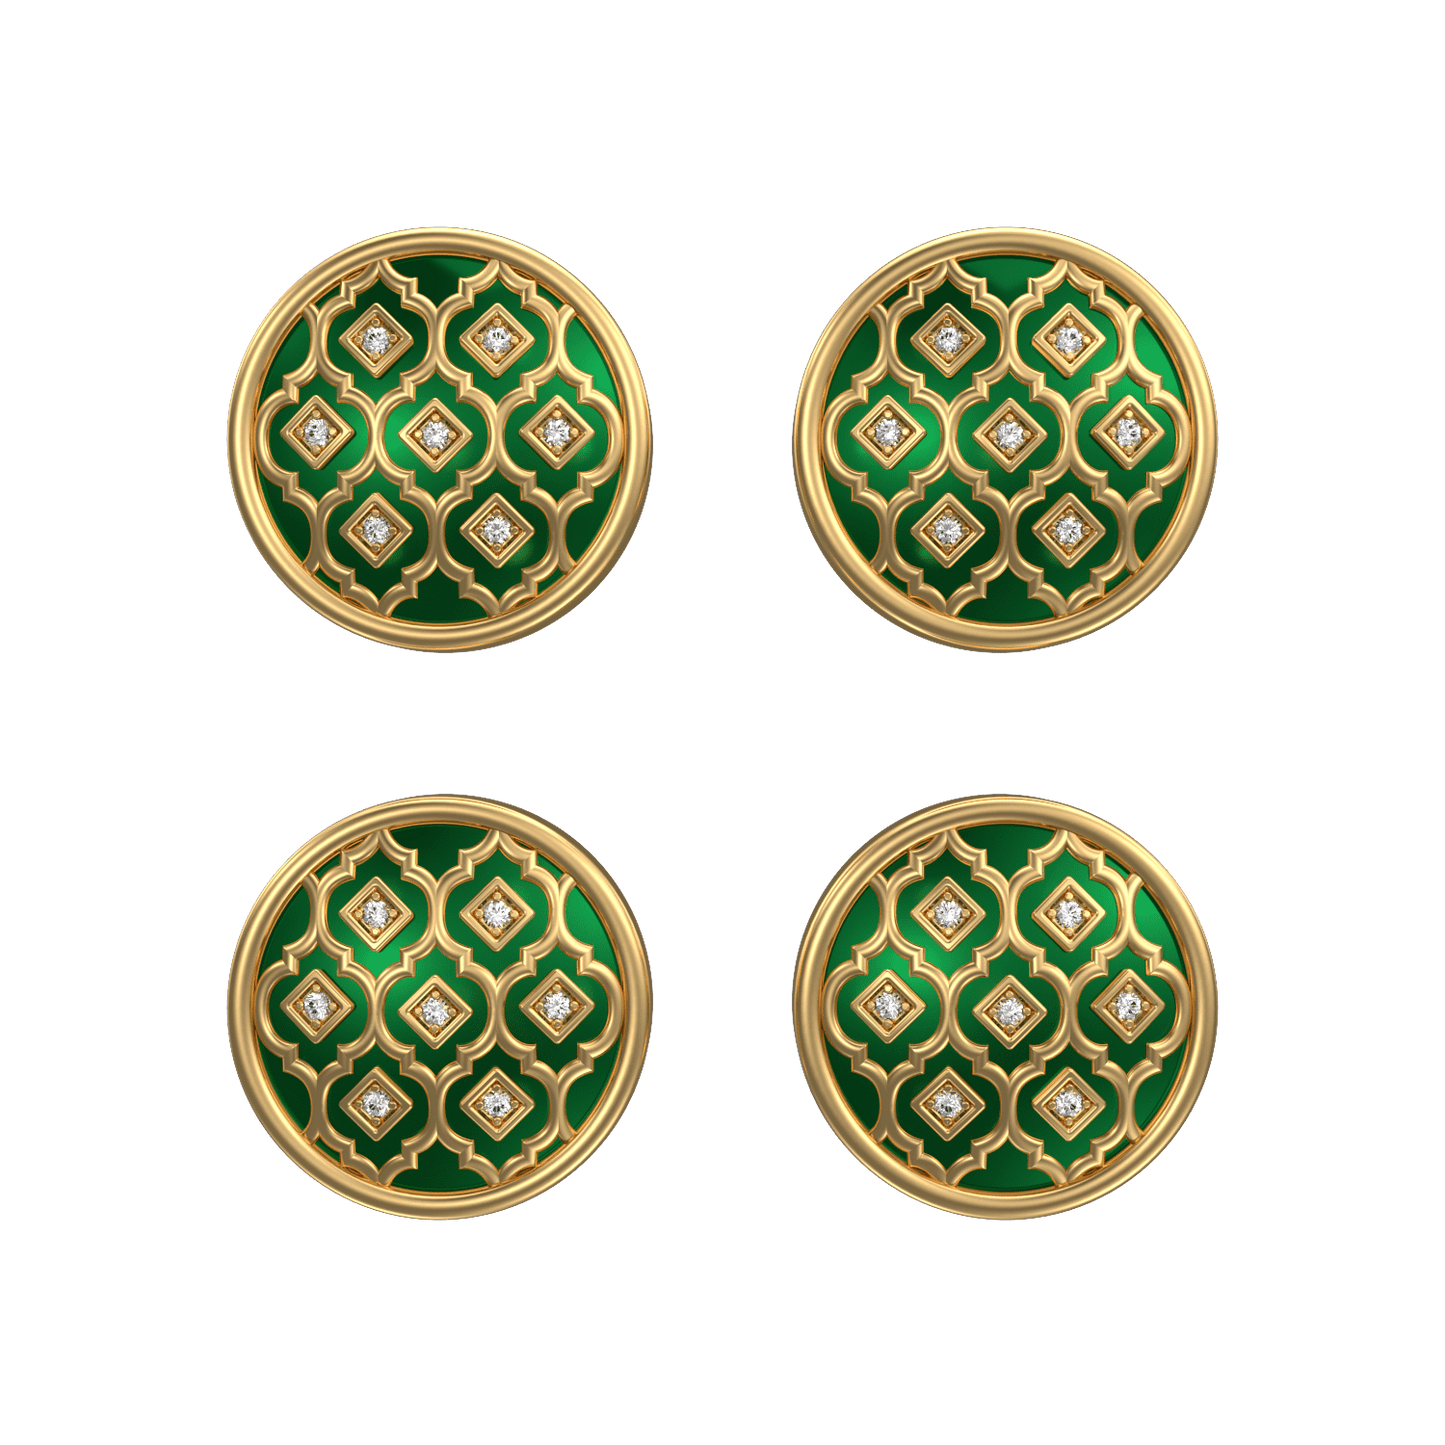 Ornate Luxe, Classic Kurta Button Set with CZ Diamonds, 18kt Gold Plating and Enamel.